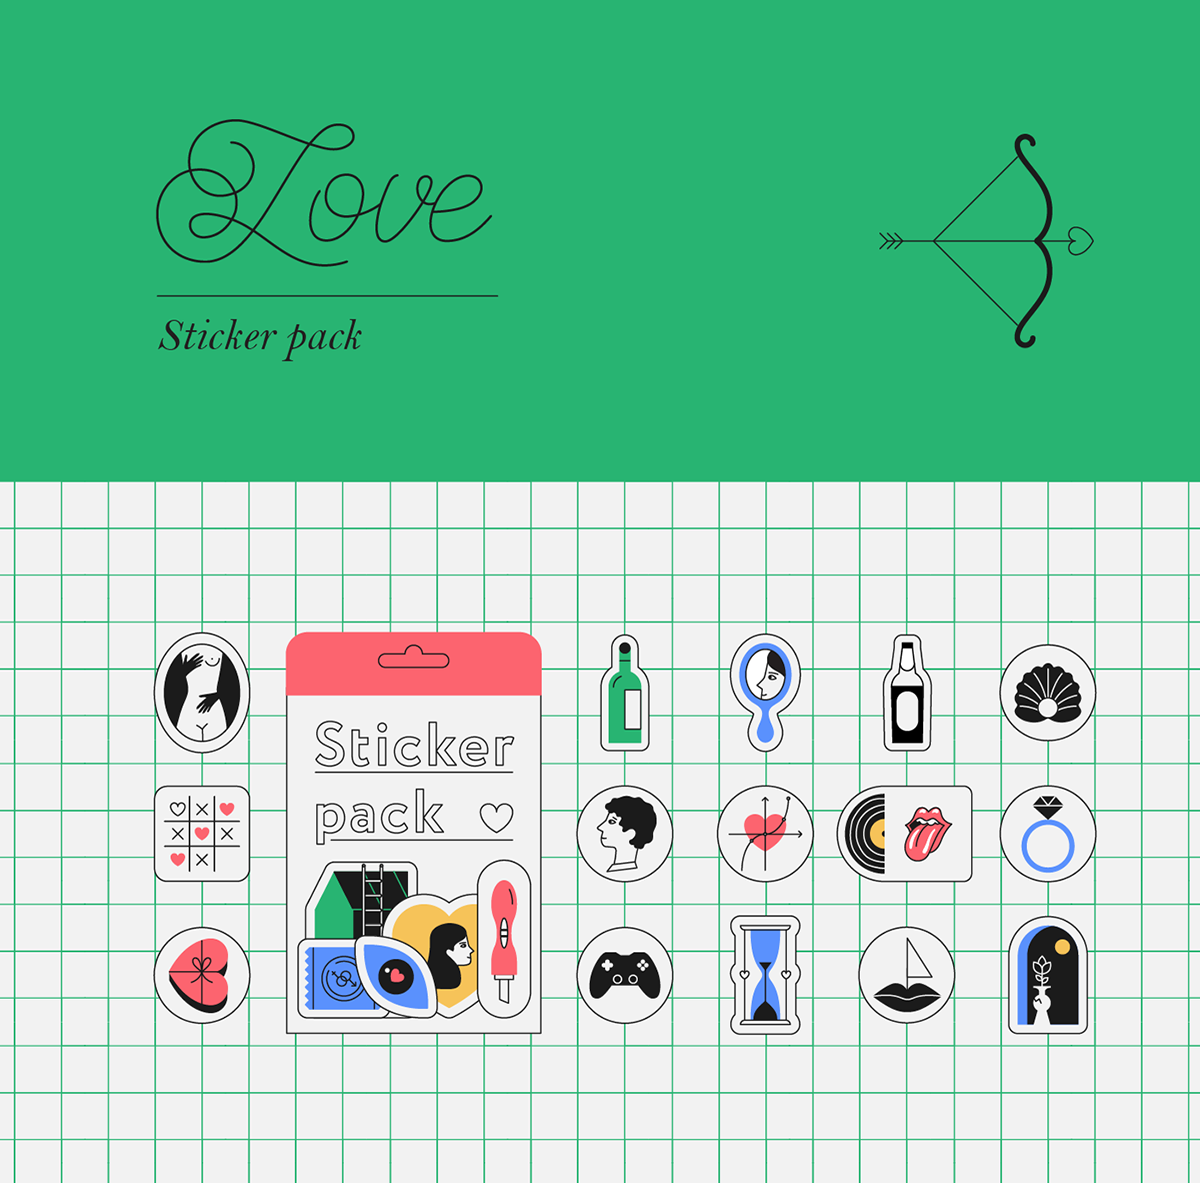 snakes and ladders board game ILLUSTRATION  Love couple game art romance sticker pack